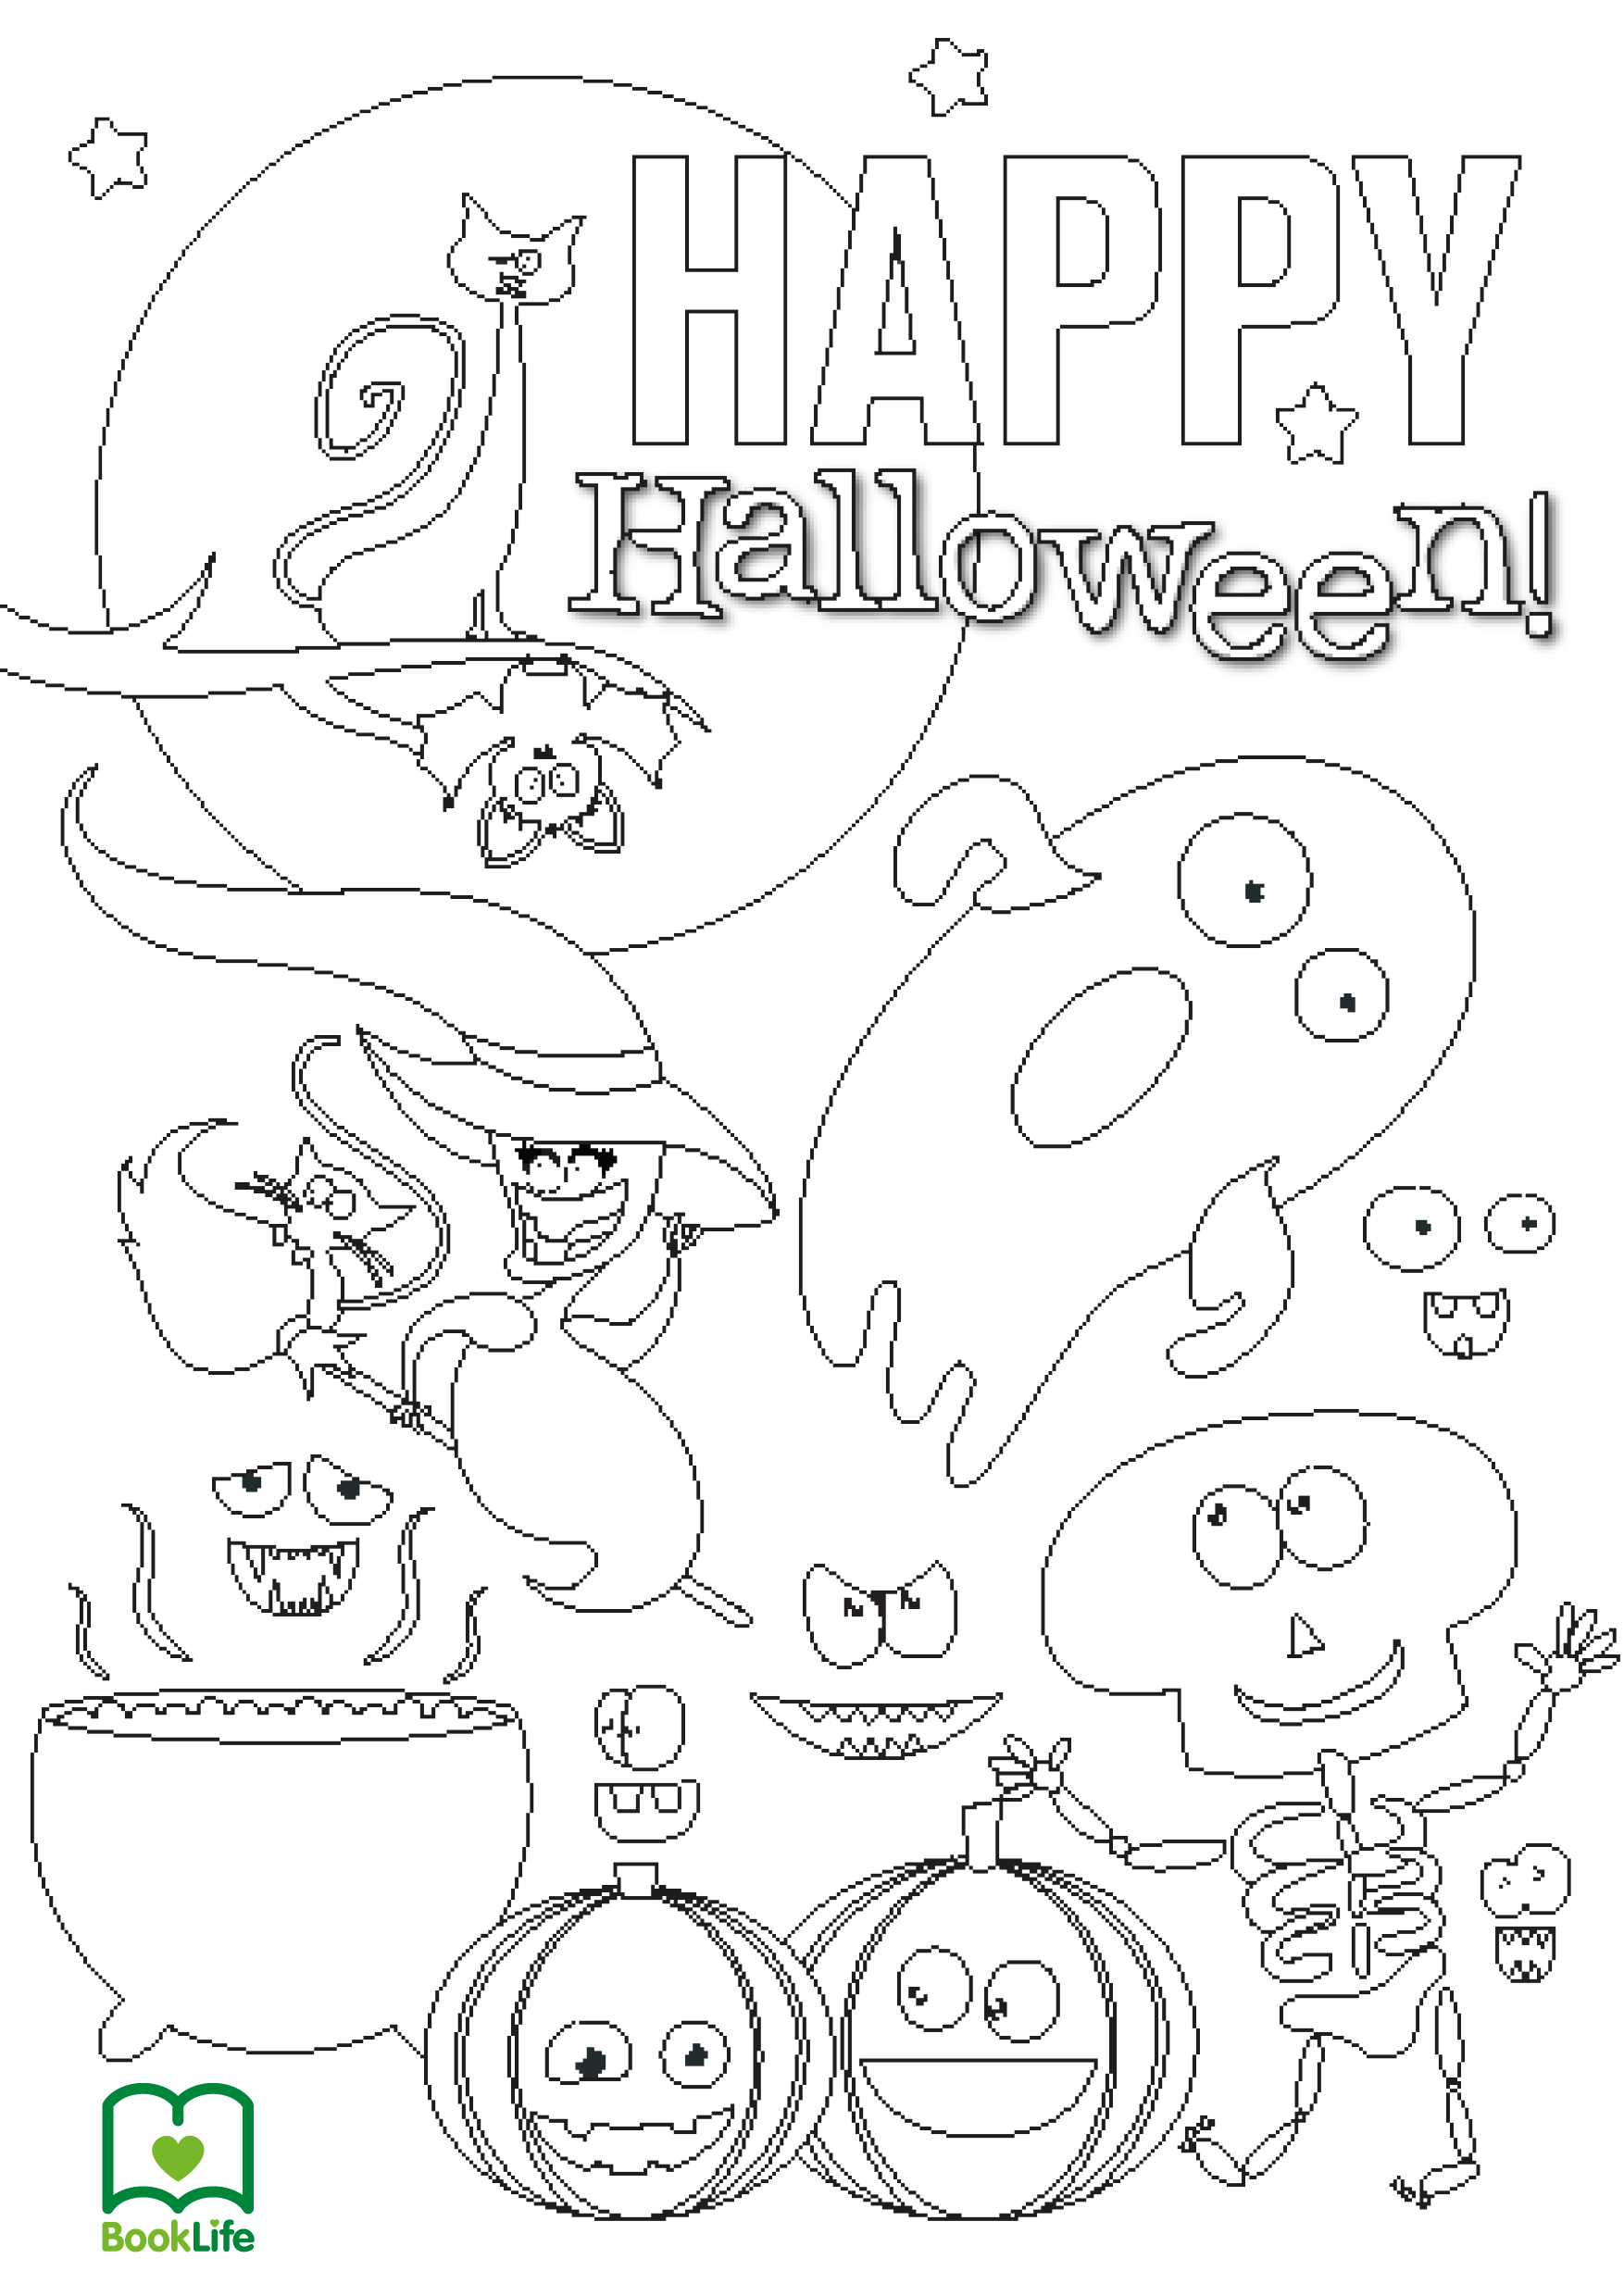 Free Spooky Halloween Colouring Sheet by BookLife